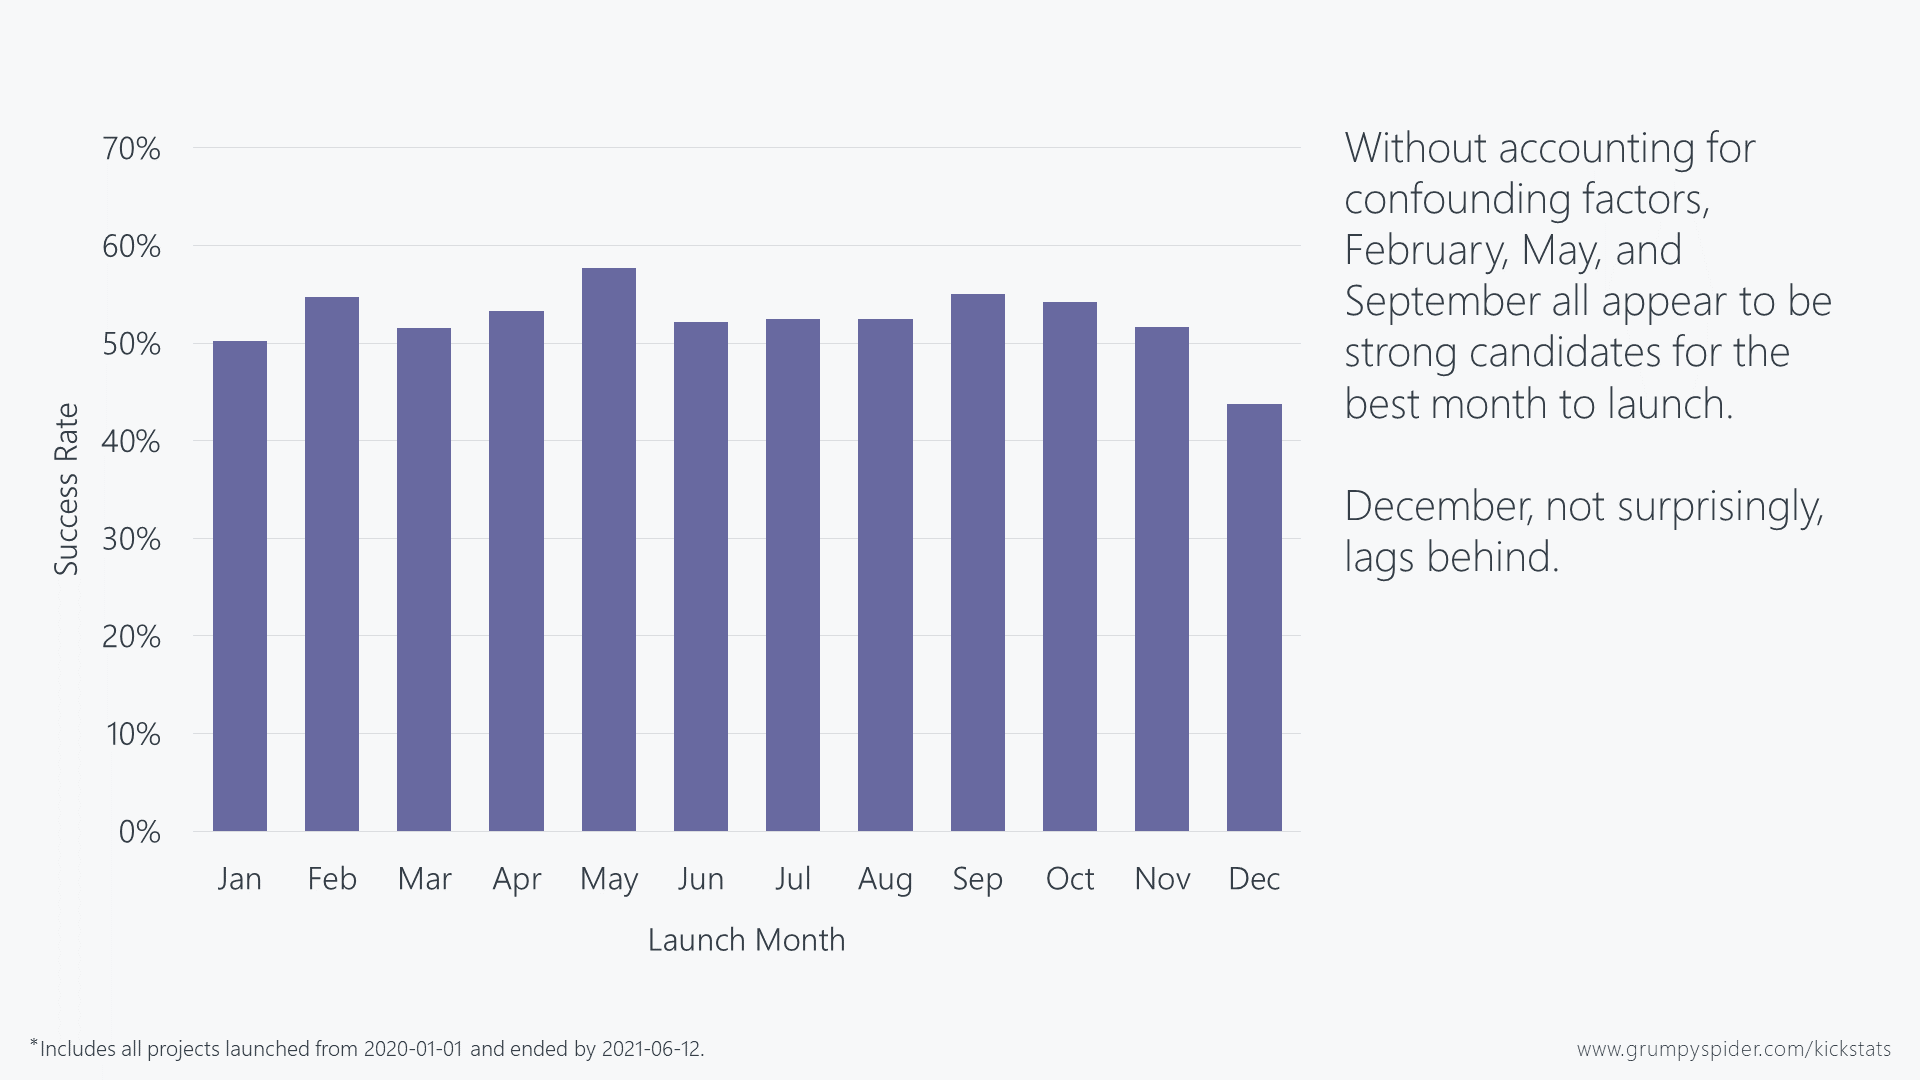 Chart showing success rates by launch month. February, May, and September are all strong candidates for best month to launch.